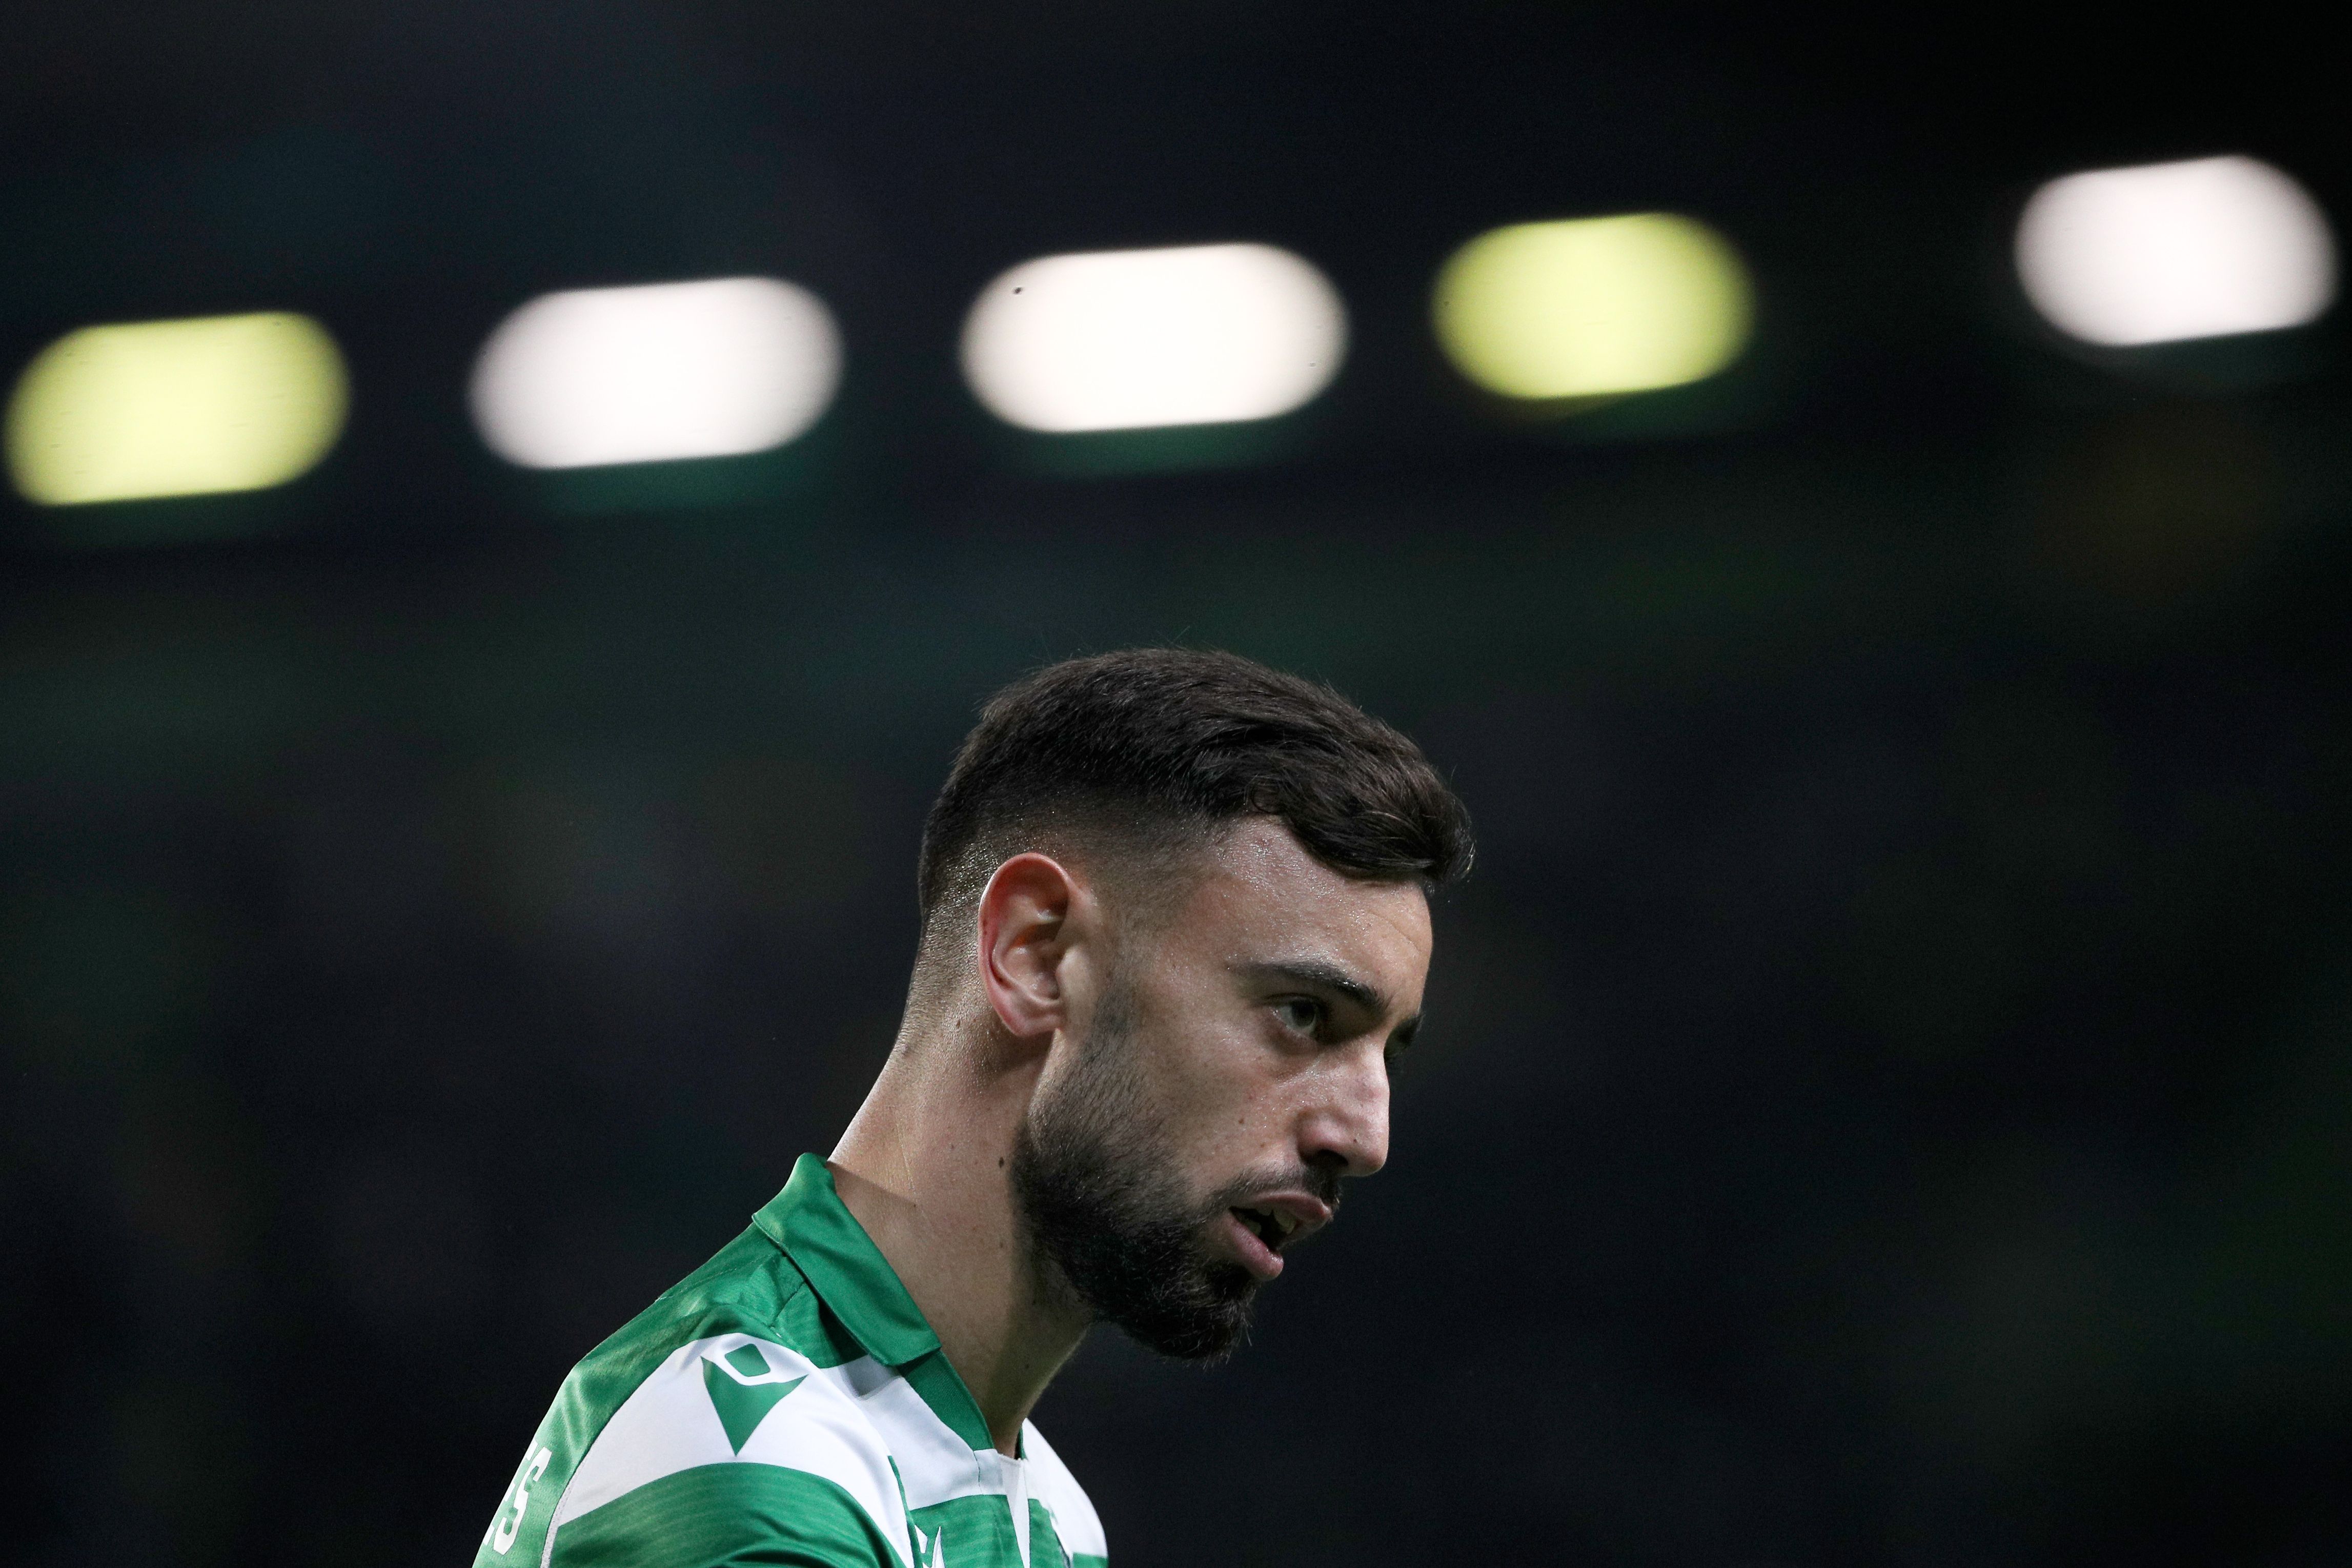 Sporting's Portuguese midfielder Bruno Fernandes looks on during the UEFA Europa League Group D football match between Sporting CP and PSV Eindhoven at the Jose Alvalade stadium in Lisbon, on November 28, 2019. (Photo by FILIPE AMORIM / AFP) (Photo by FILIPE AMORIM/AFP via Getty Images)